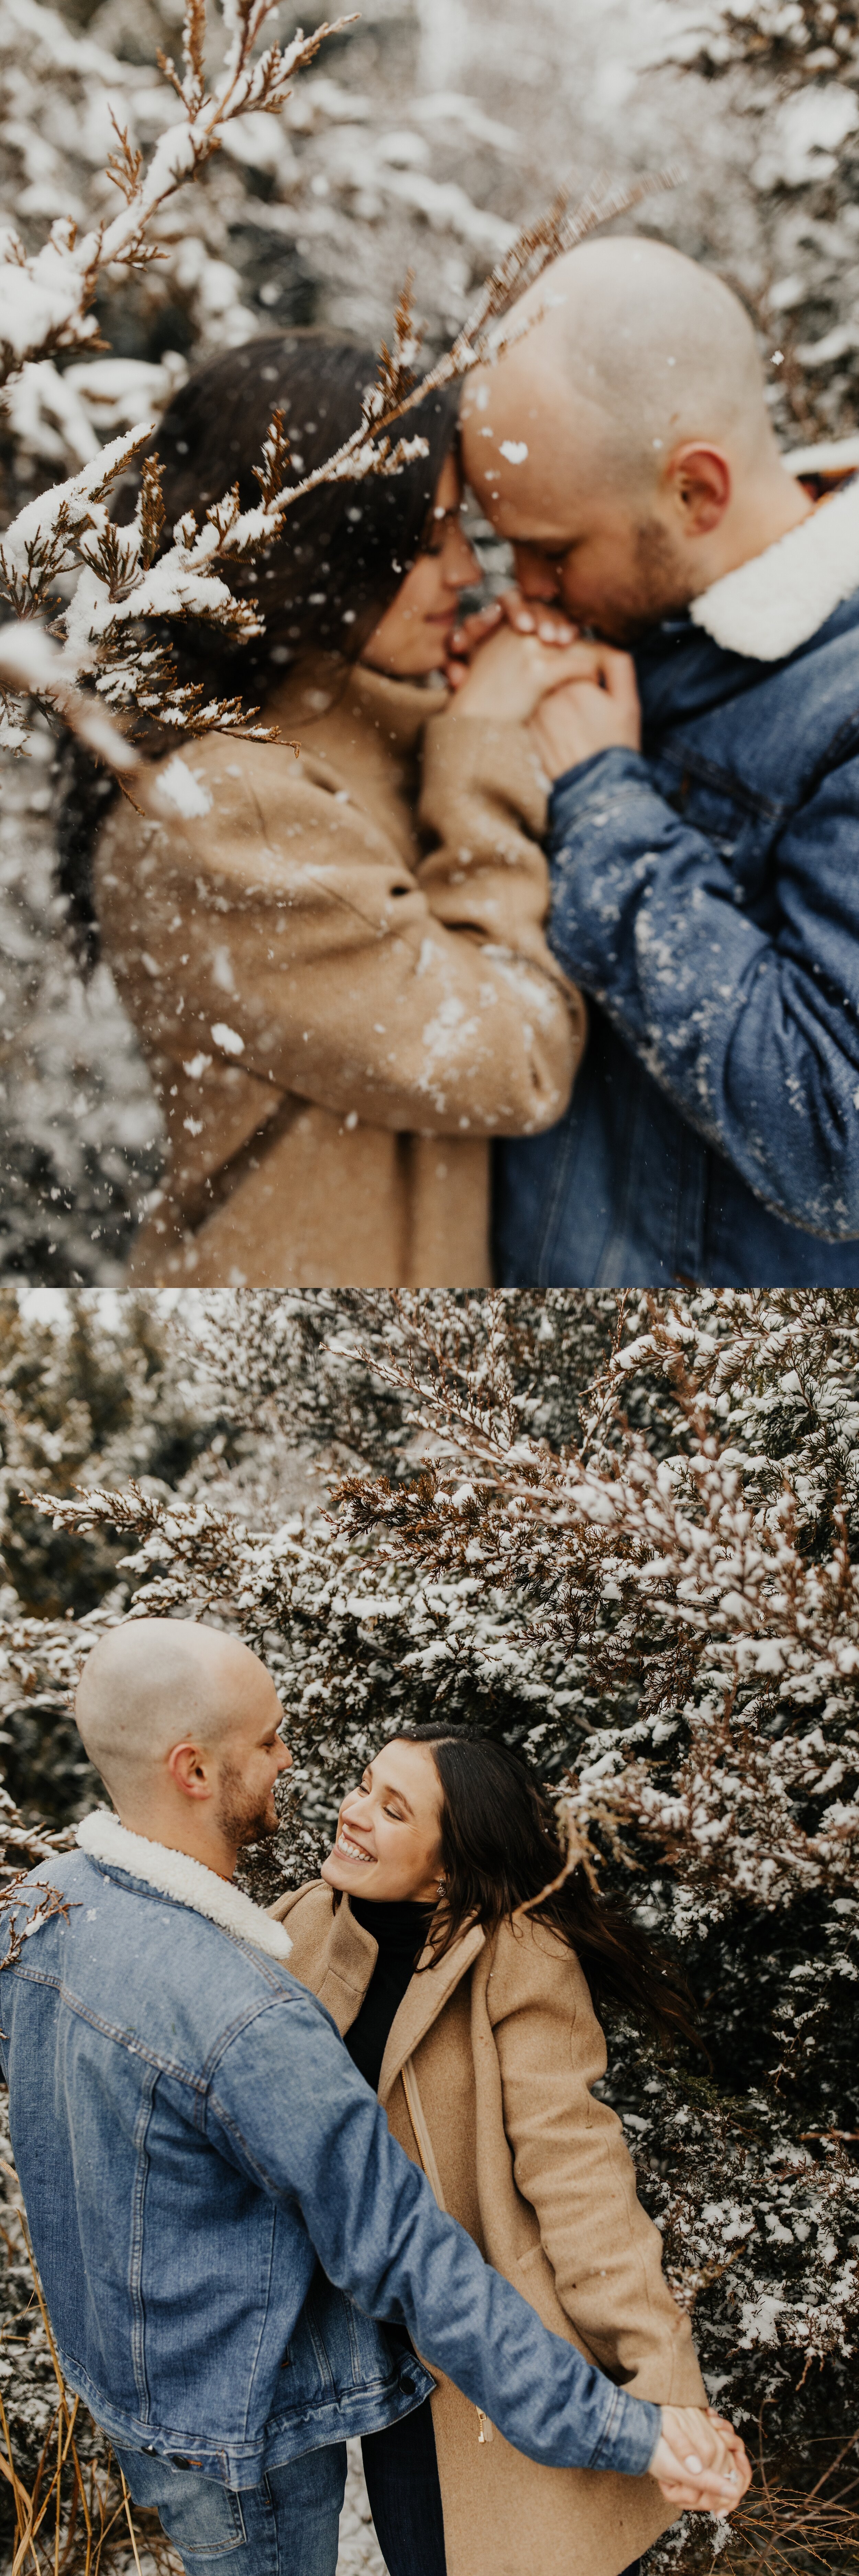 jessika-christine-photography-outdoor-engagement-couples-snow-adventurous-session (13).jpg